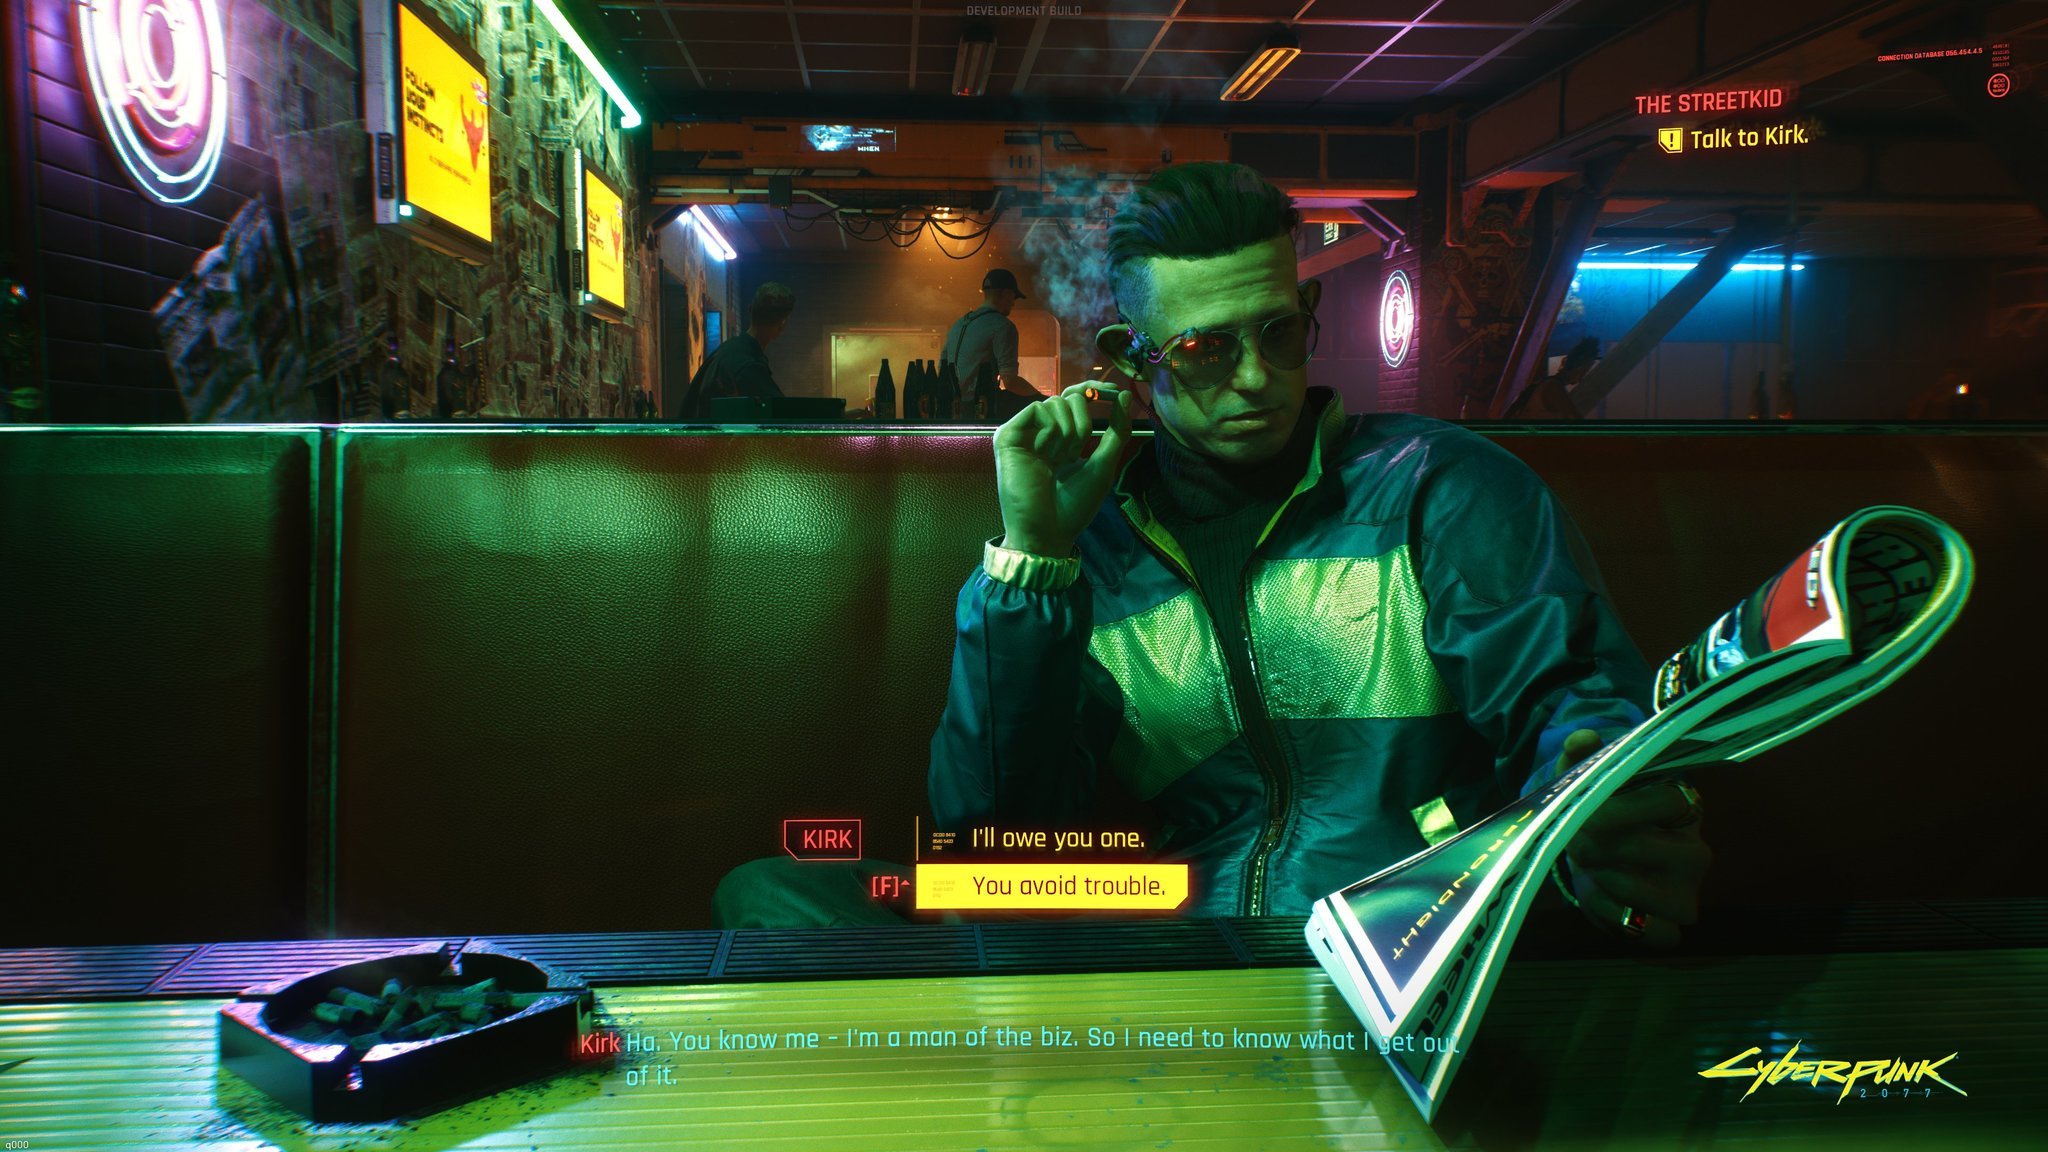 Sony pulls Cyberpunk 2077 from PlayStation Store